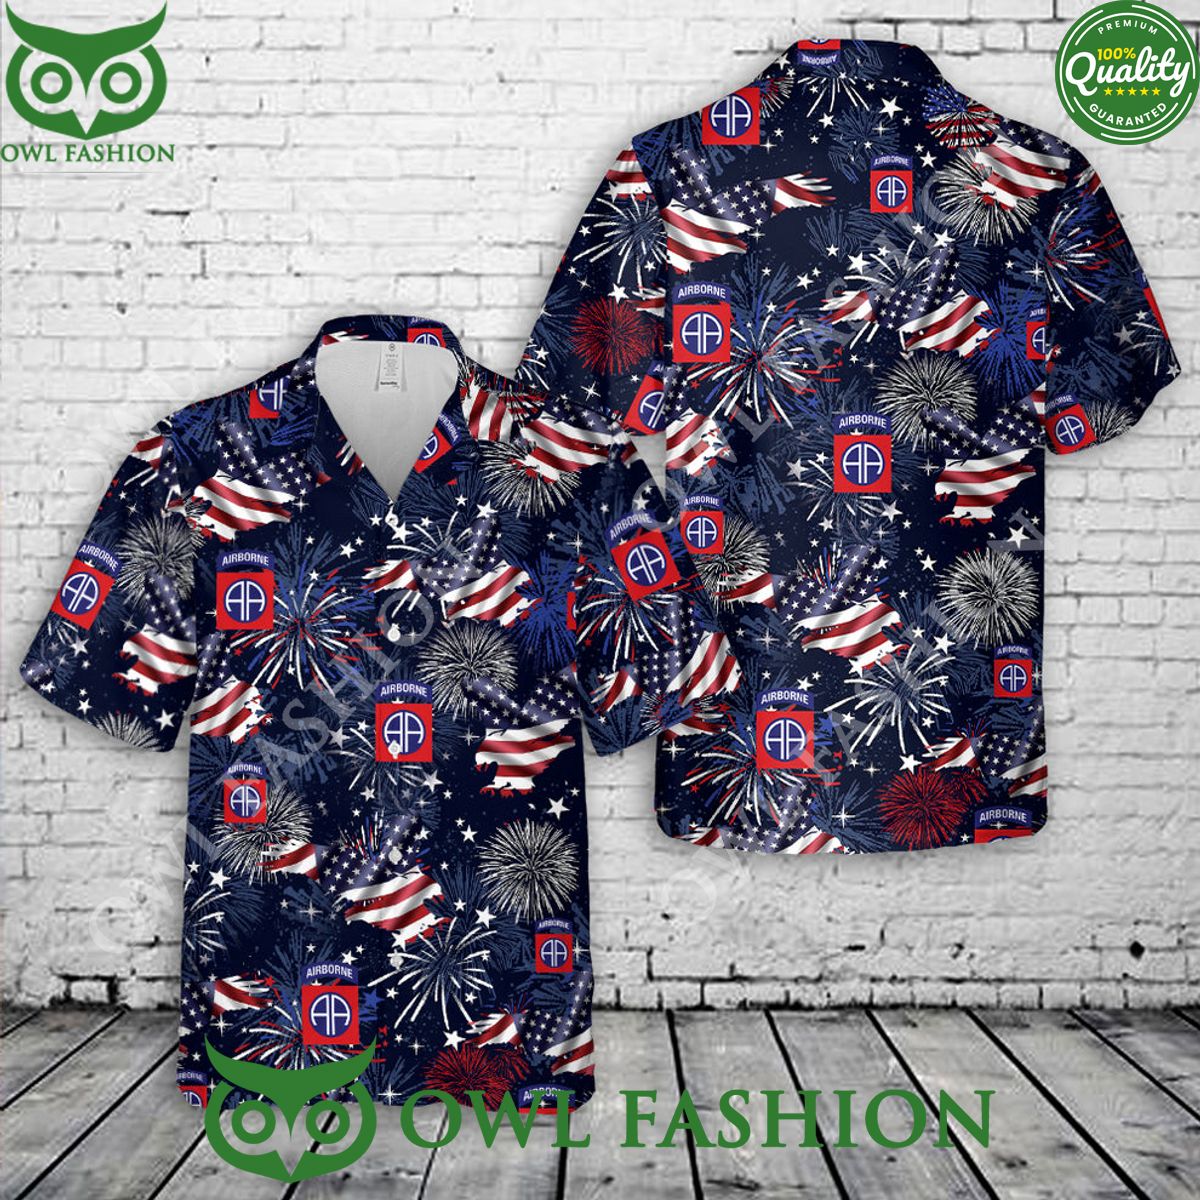 us army 82nd airborne division paratrooper 4th of july hawaiian shirt 1 4WUbd.jpg